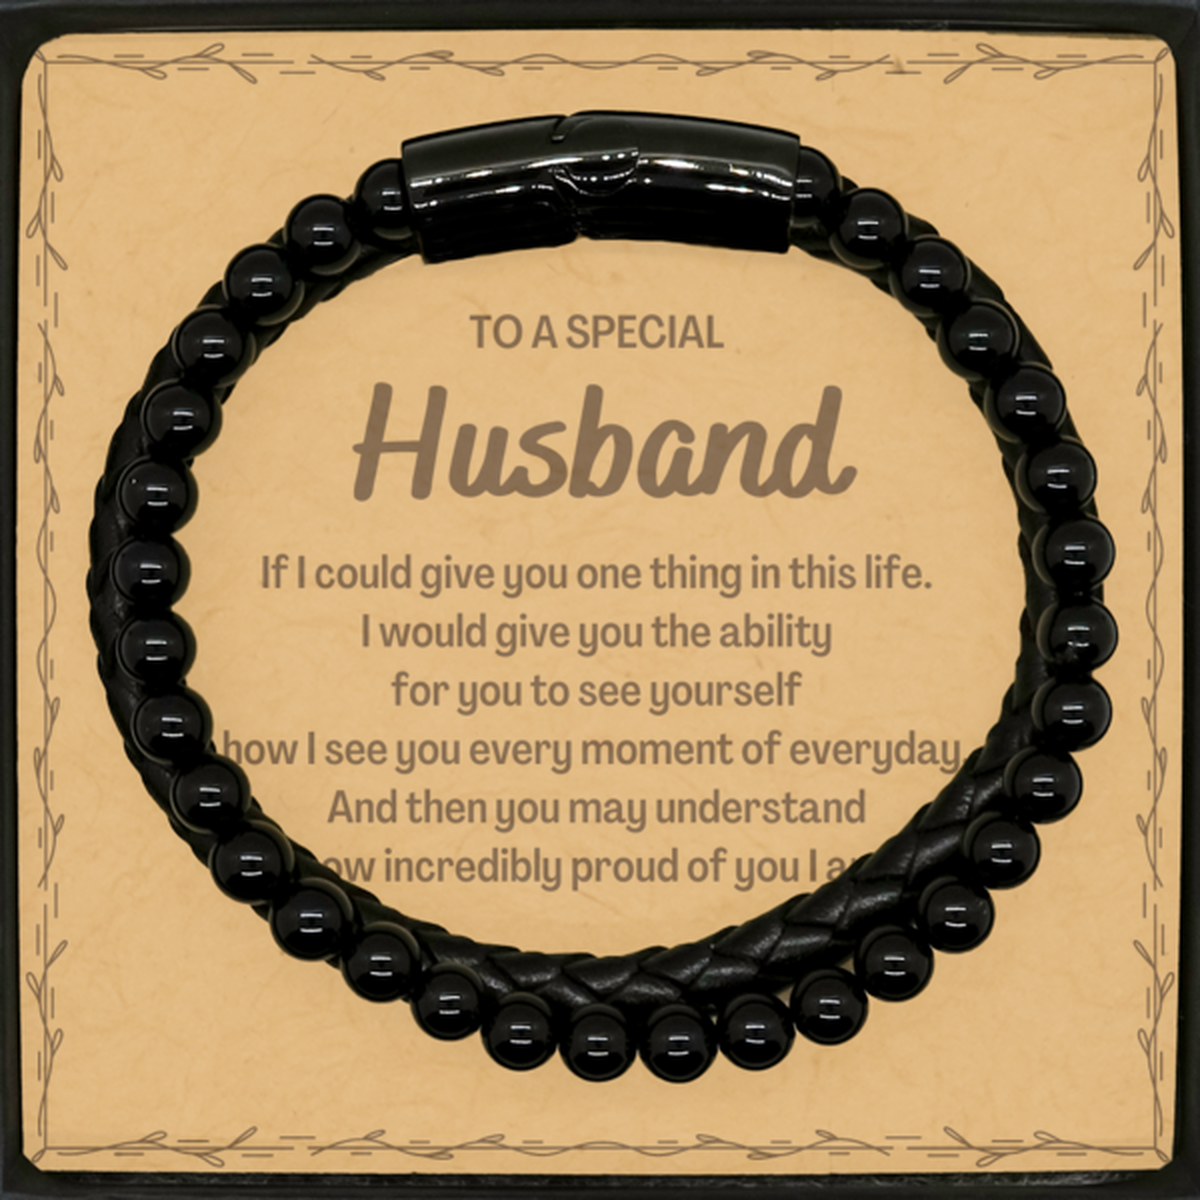 To My Husband Stone Leather Bracelets, Gifts For Husband Message Card, Inspirational Gifts for Christmas Birthday, Epic Gifts for Husband To A Special Husband how incredibly proud of you I am